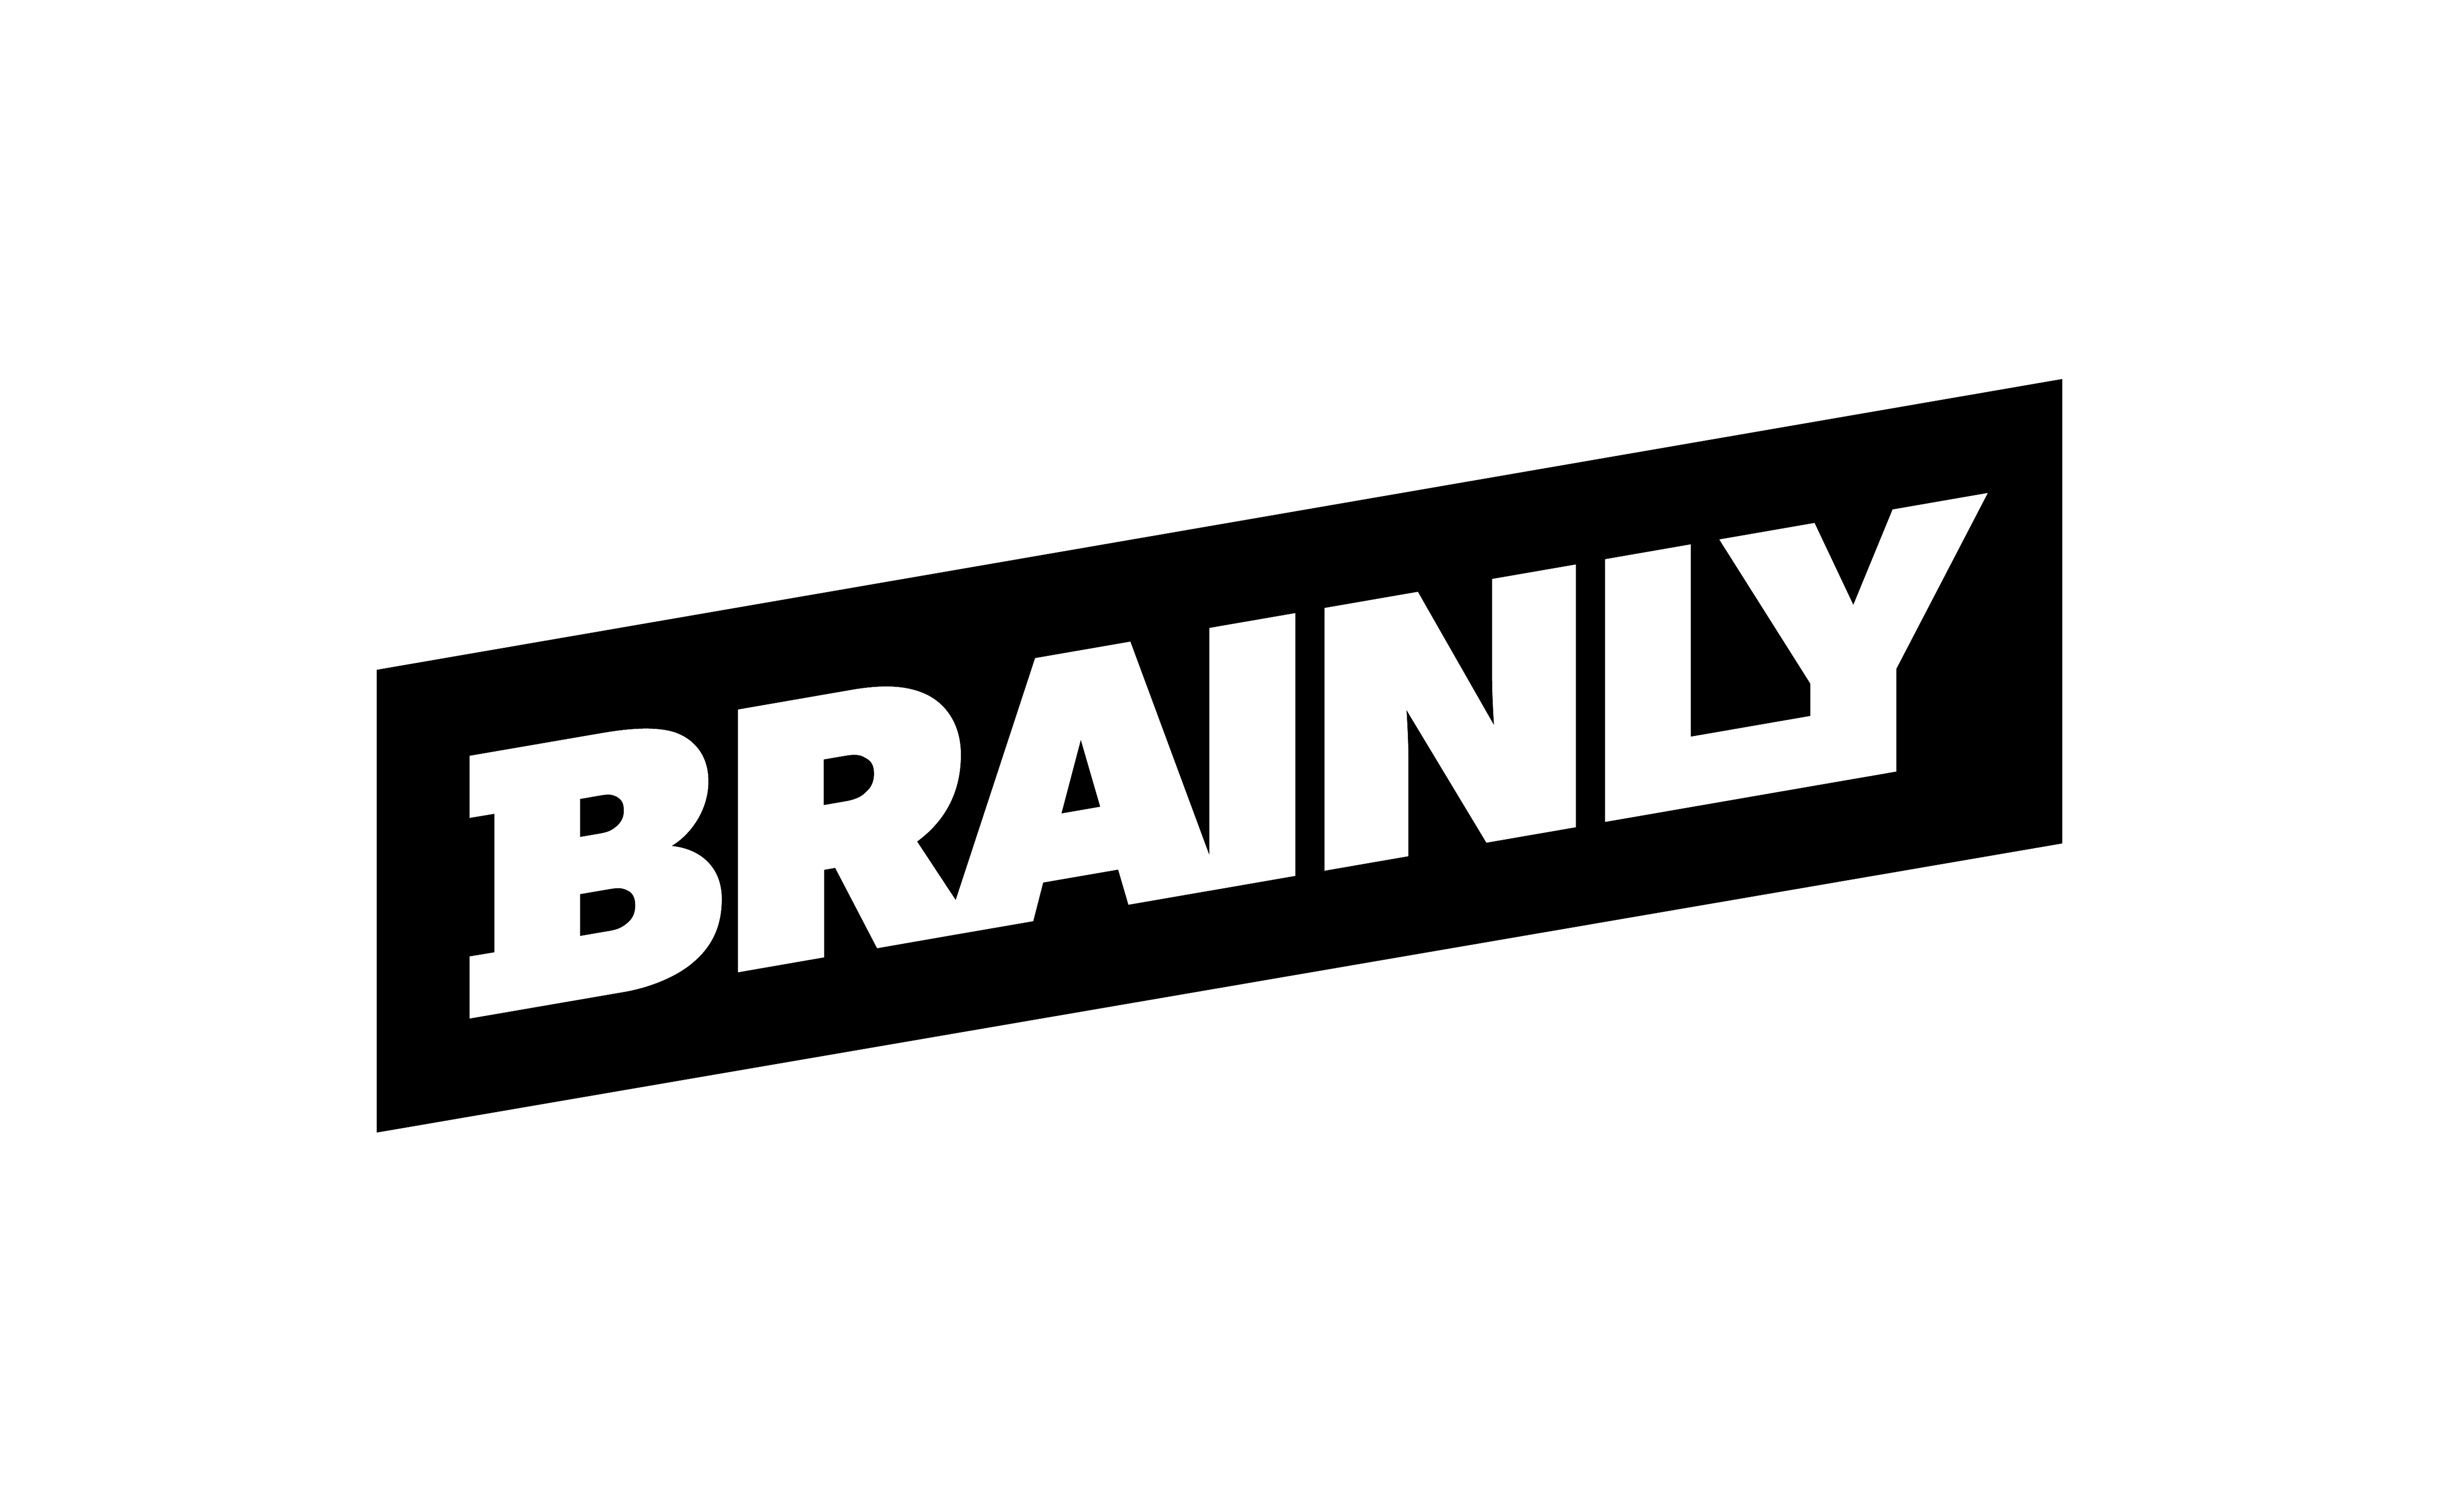 Job Application For Android Engineer Experiments For Conversion Optimisation At Brainly